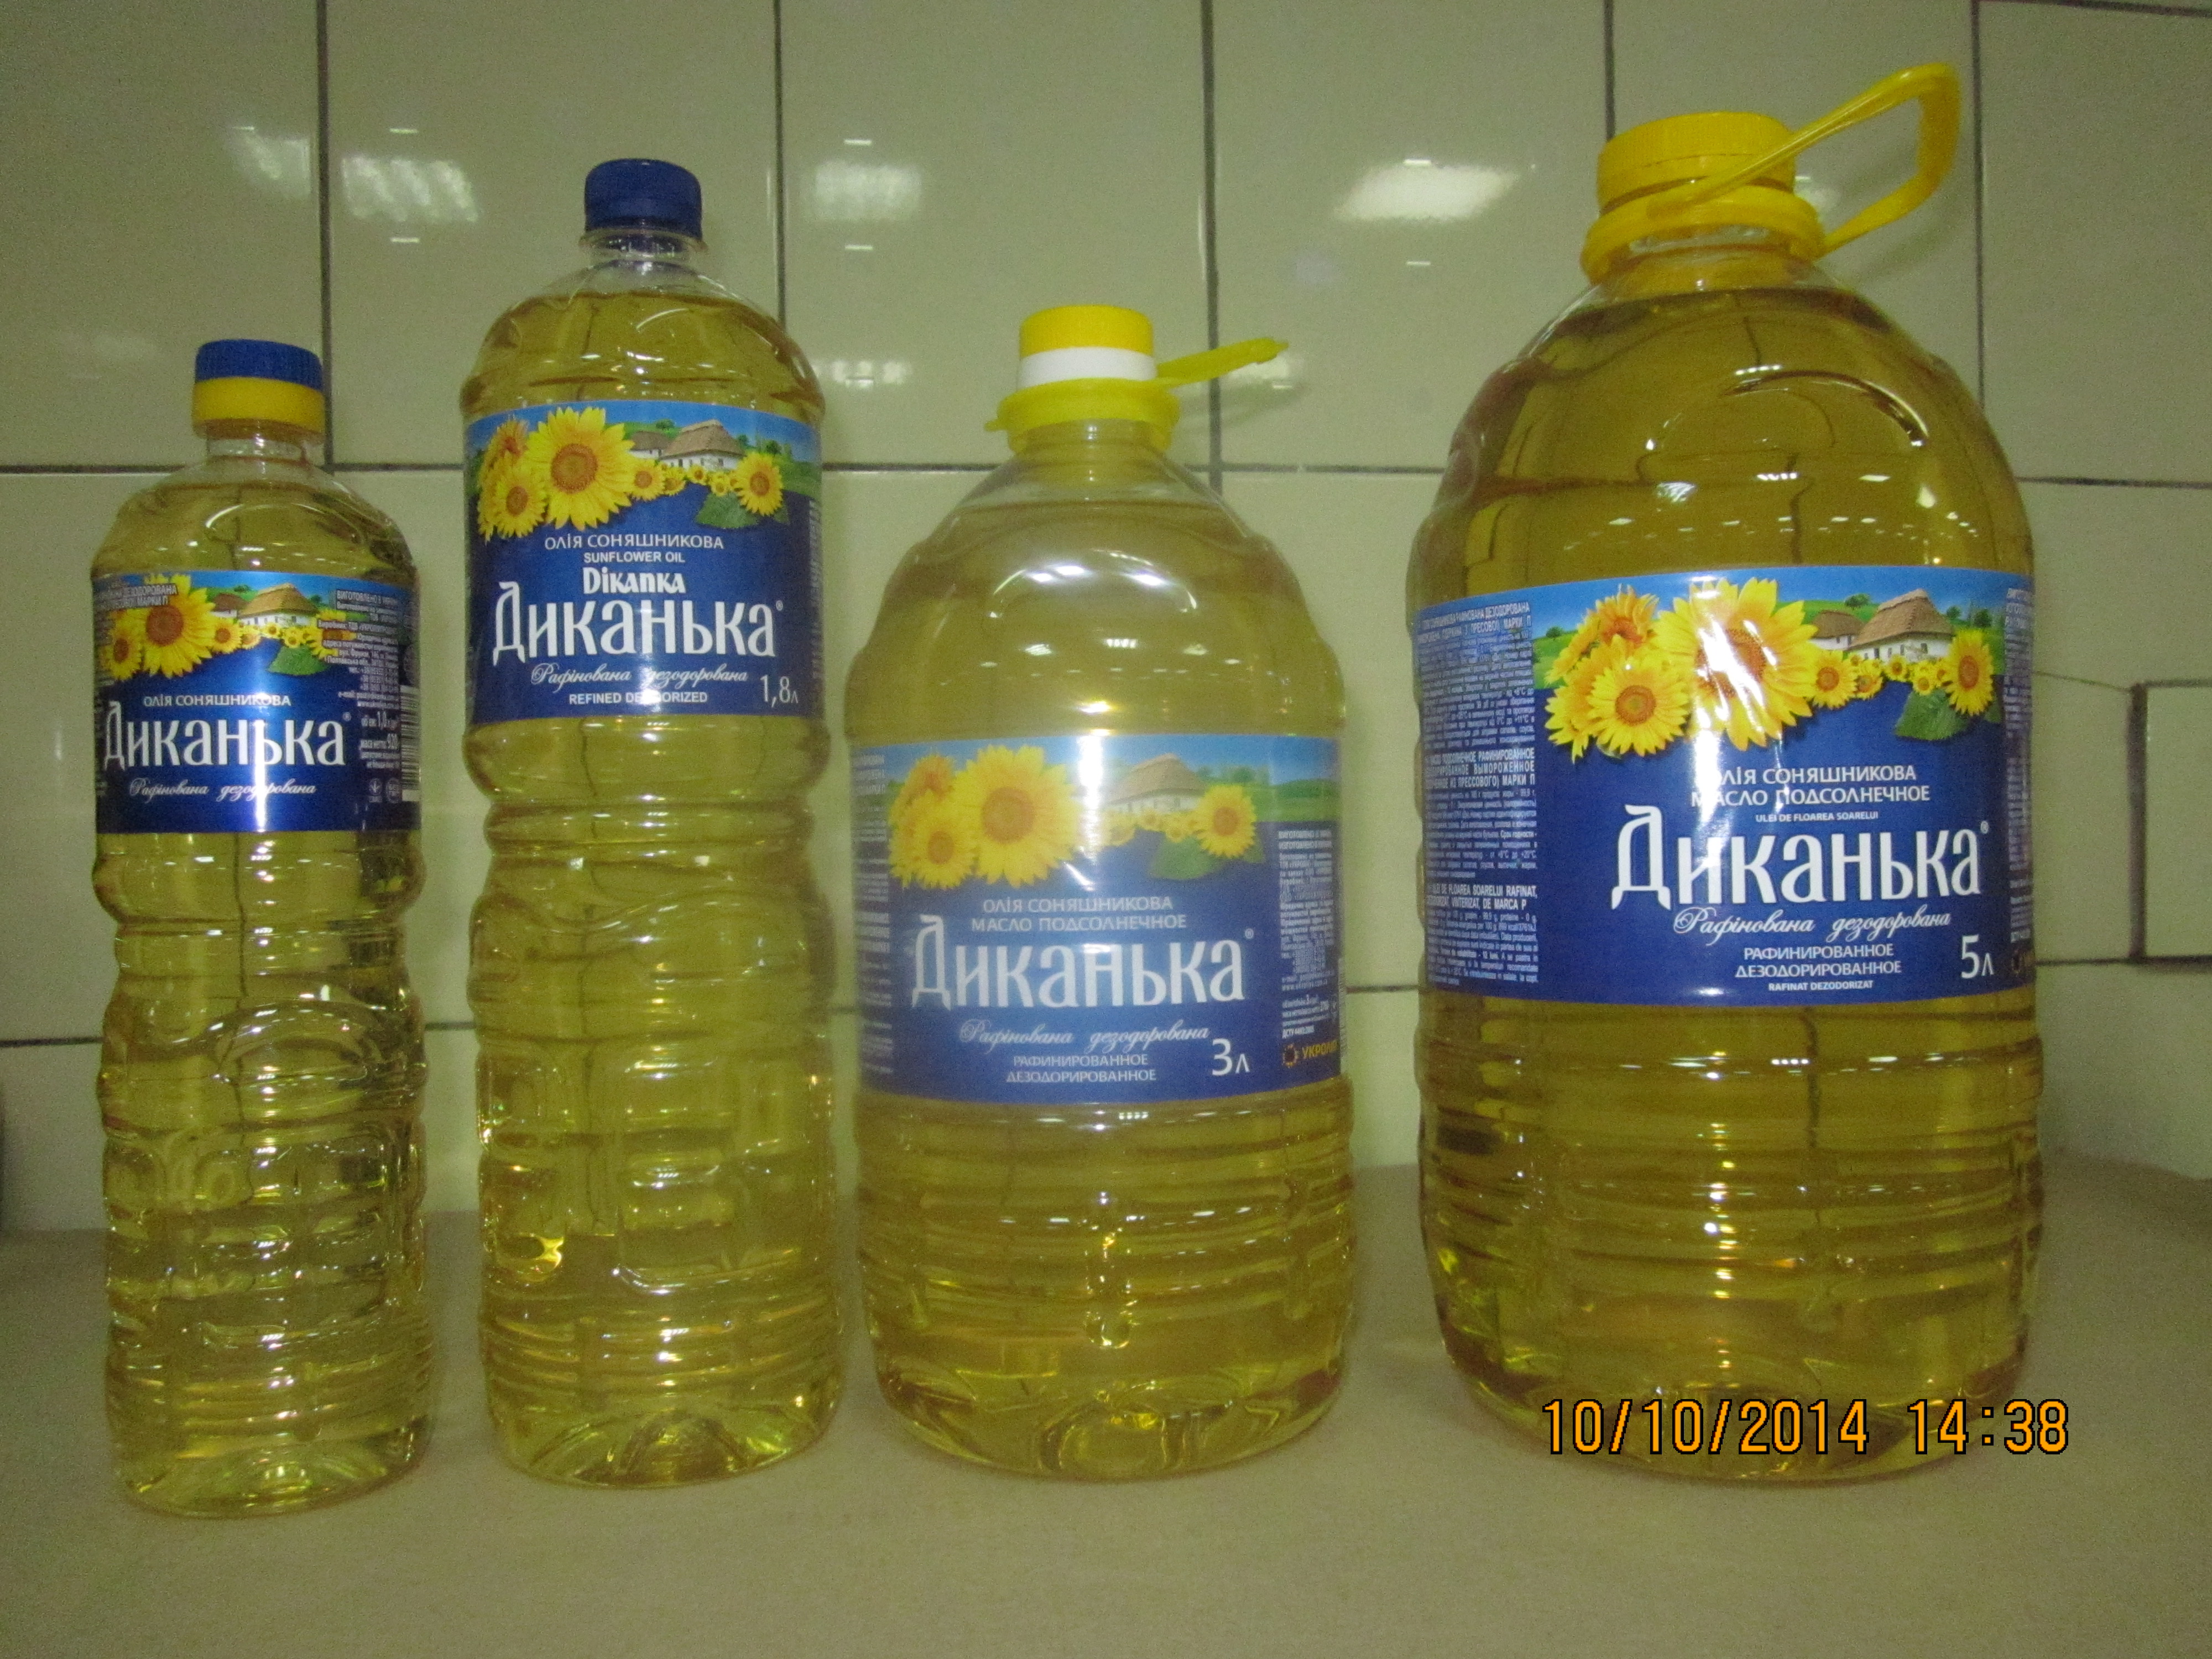 Vegetable Oil: Sunflower Refined Deodorized Winterized Oil (produced From Worm-press Oil) Of P Grade, And  Non-refined Sunflower Oil), Corn Oil, Rapeseed And Soybean Oil;  - Products Processing,food For Animals:  Press Cake And Meal.